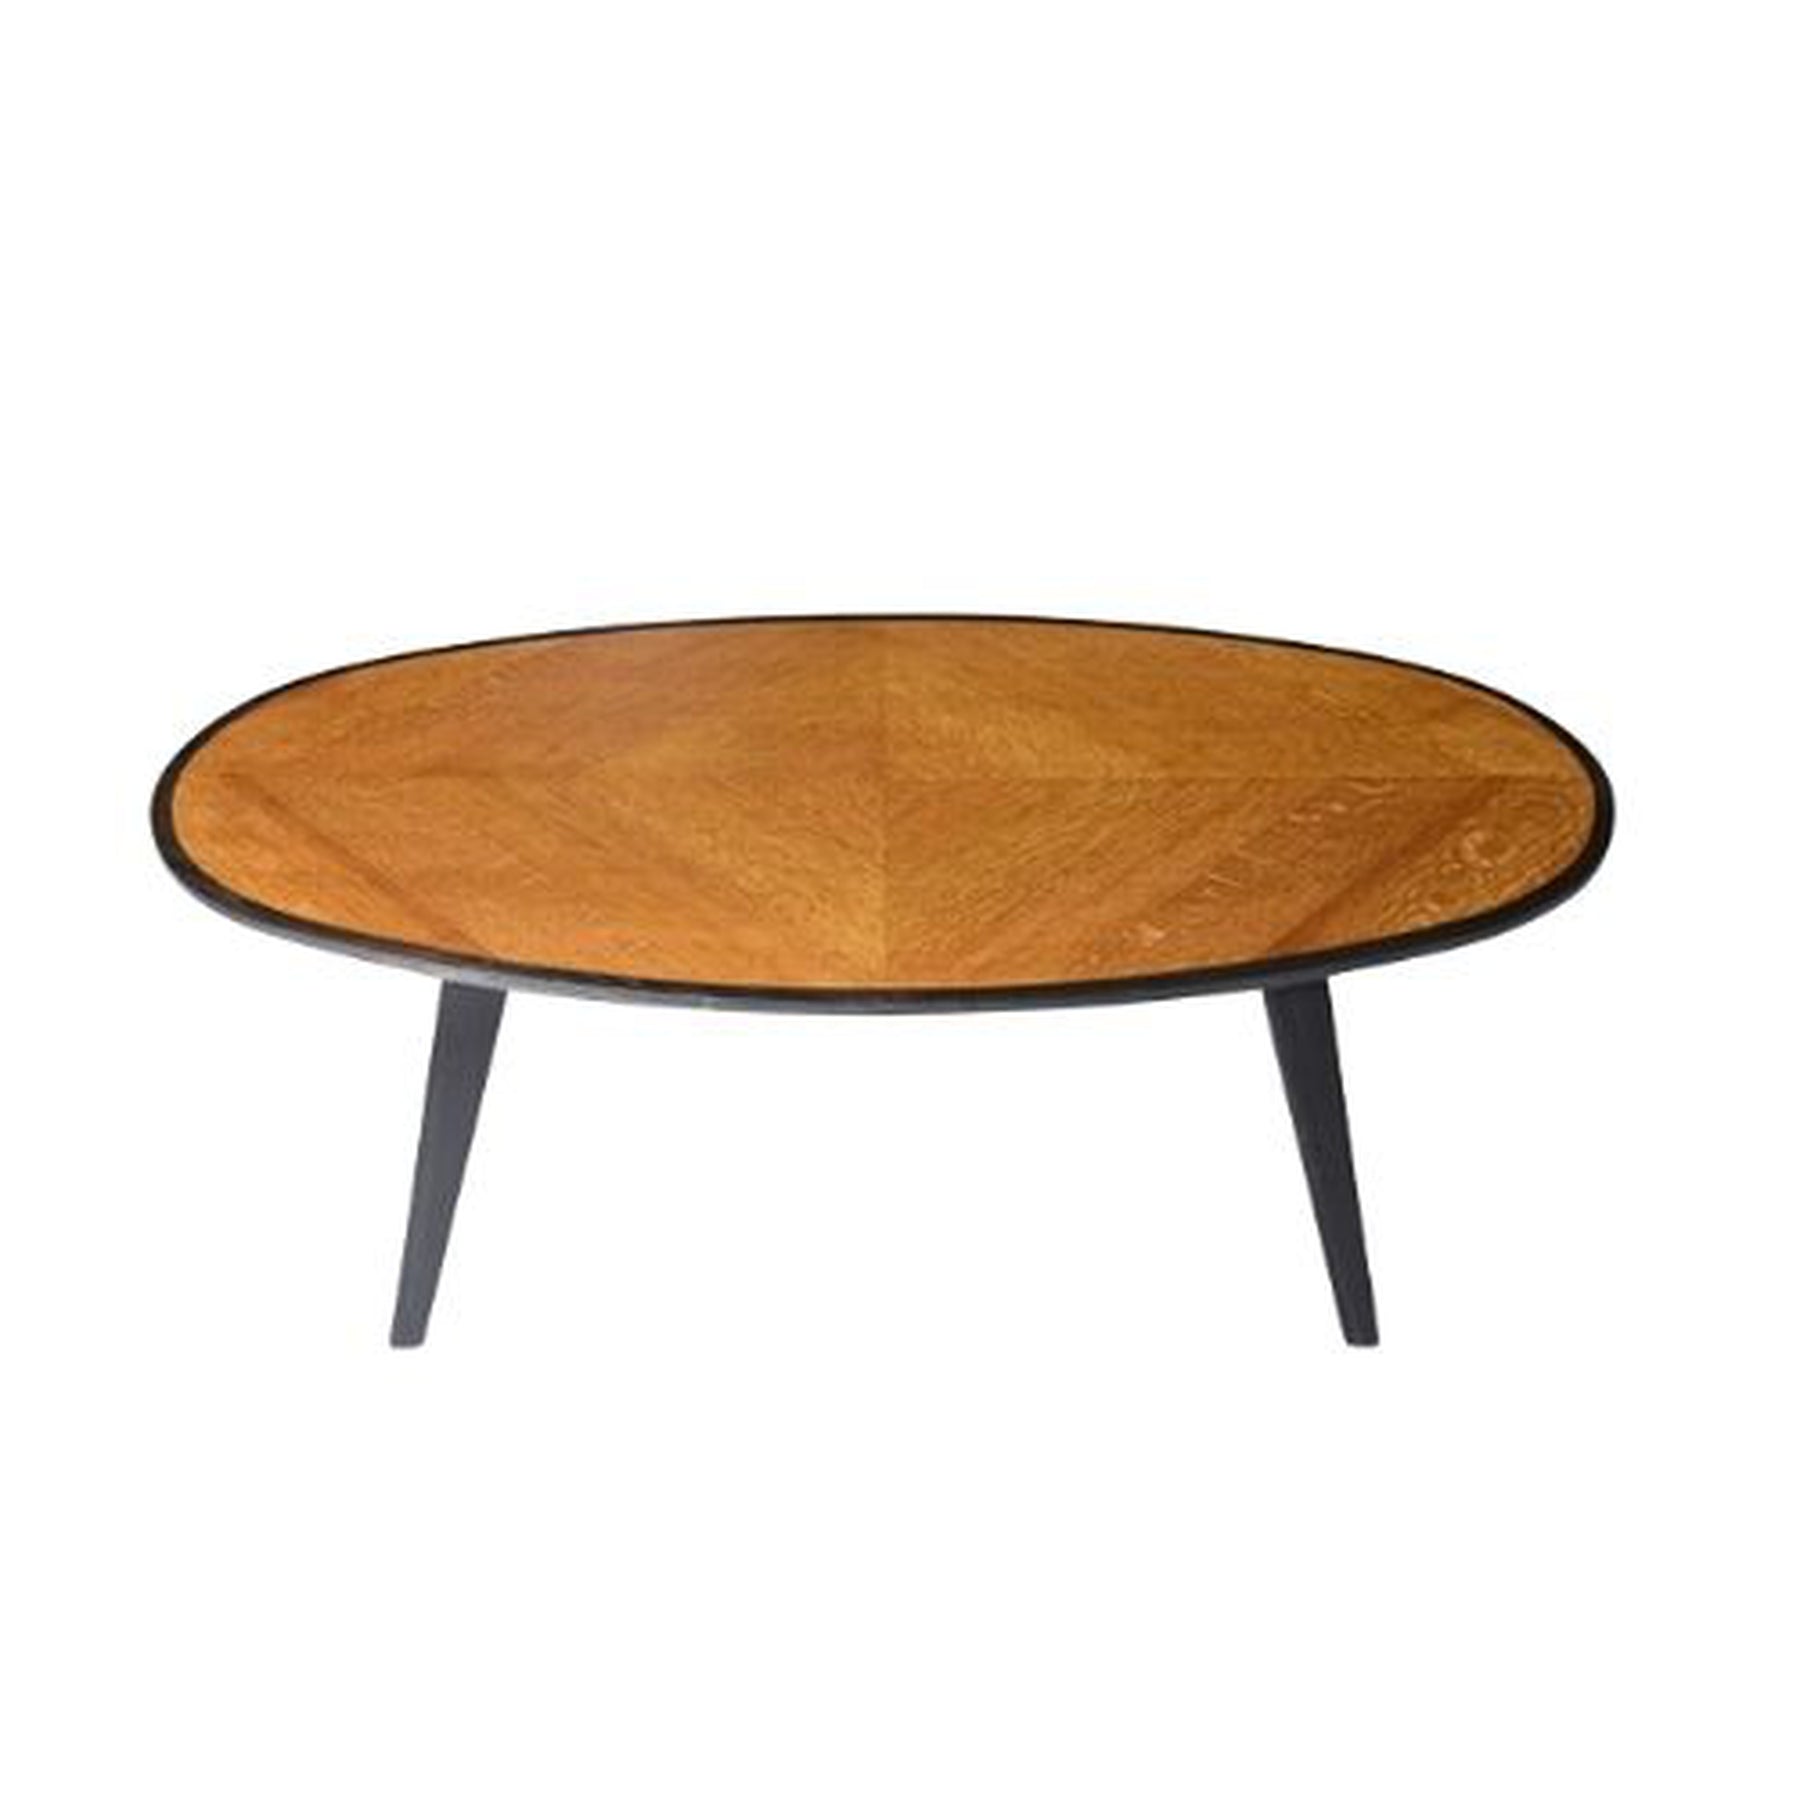 Coffee Table | Oval Shape Wooden Coffee Table | Industrial Style Oval Wood Cocktail Table | 49x24x16 inches